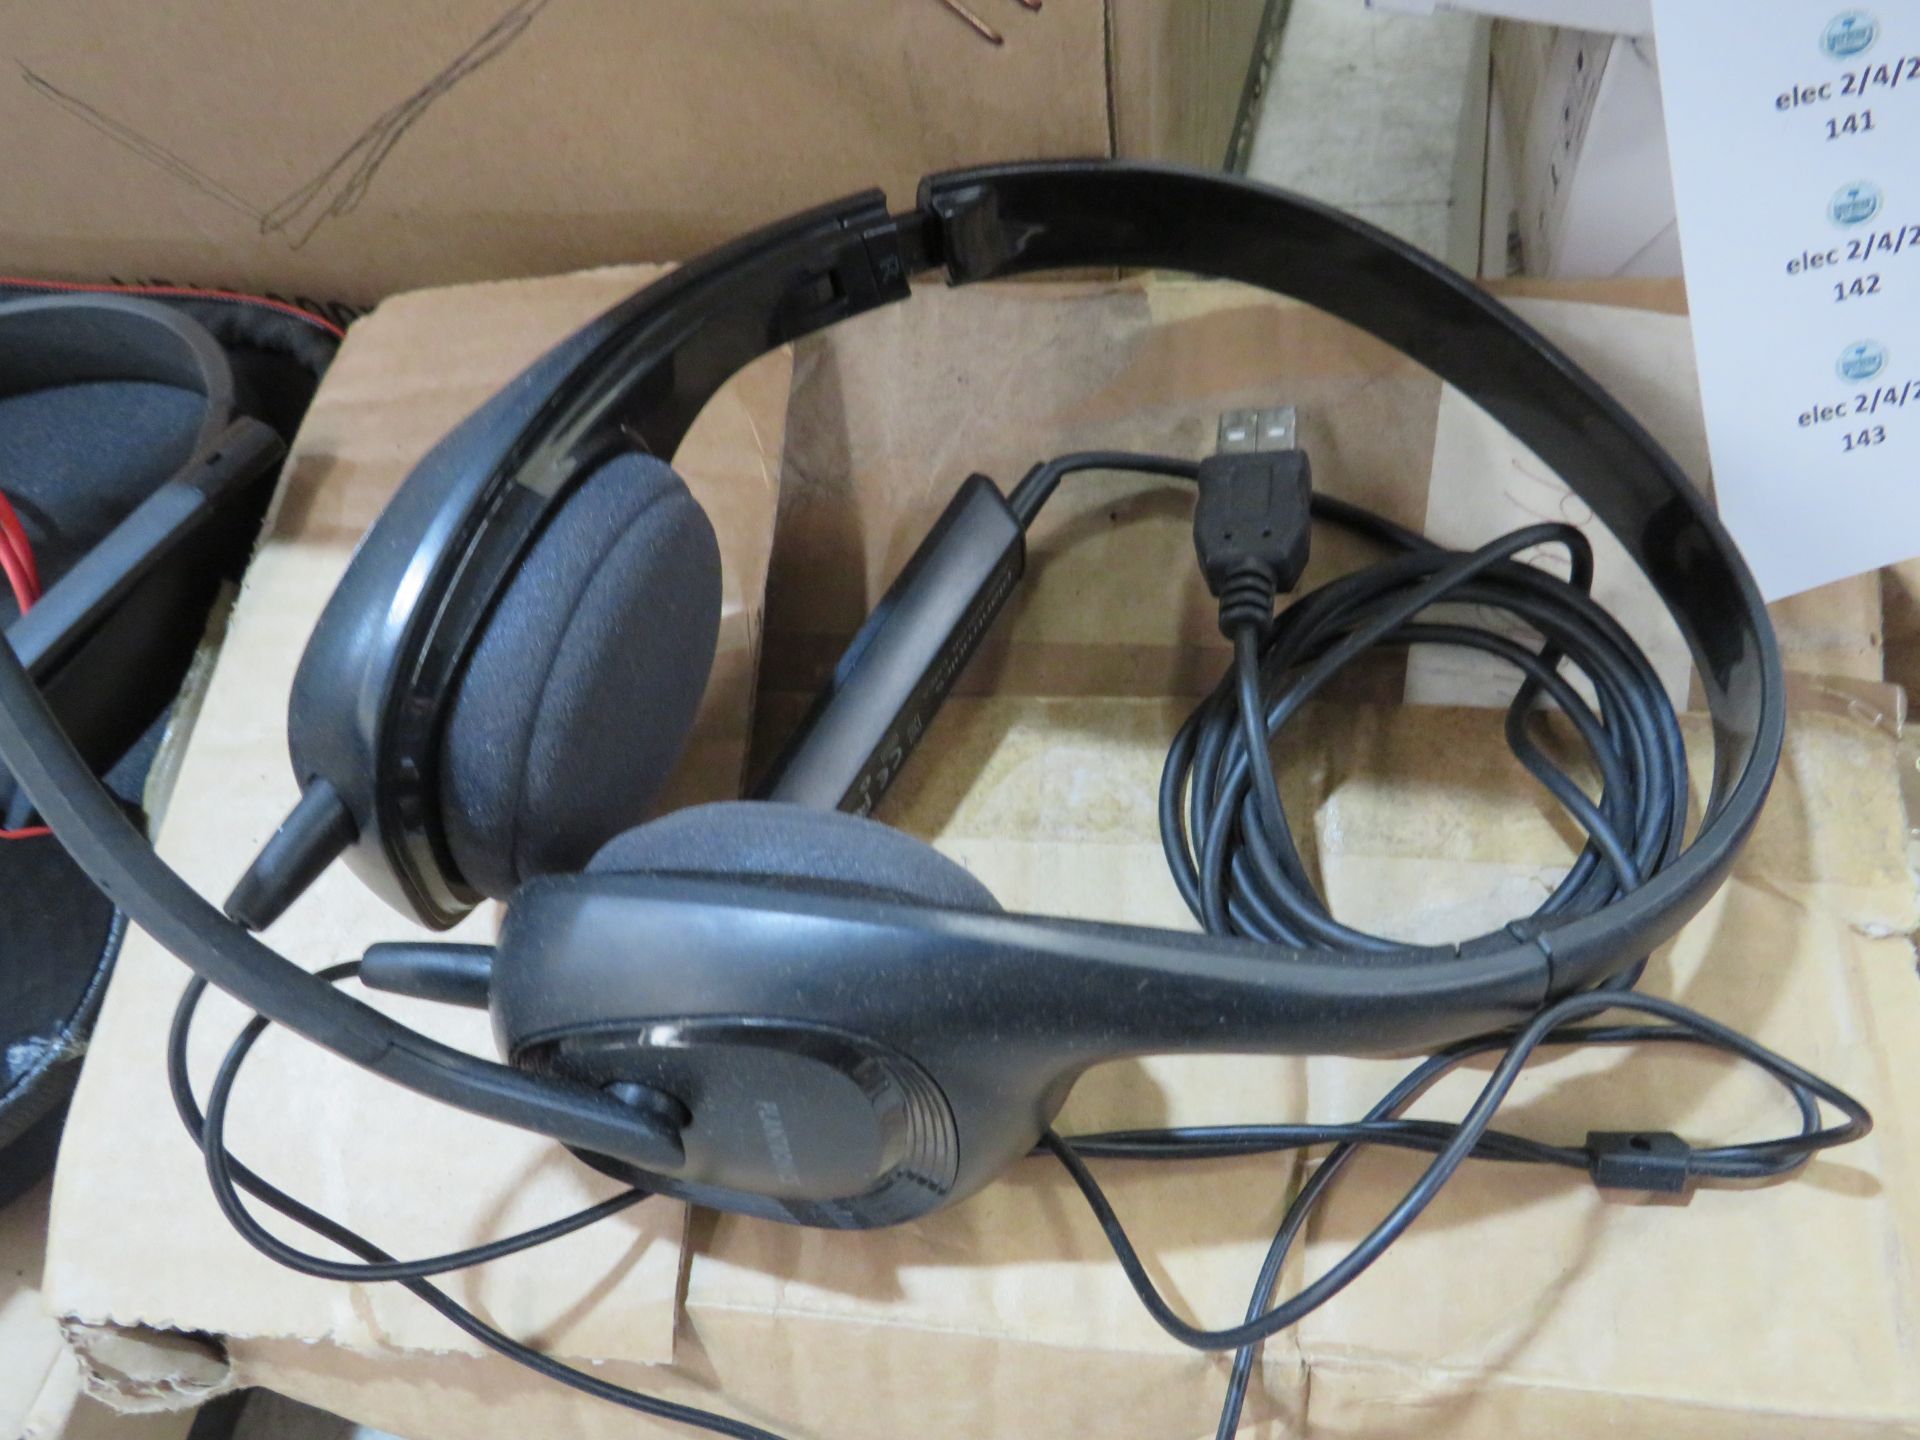 Plantronics wired headset, tested working for sound to the earphones and the microphone.